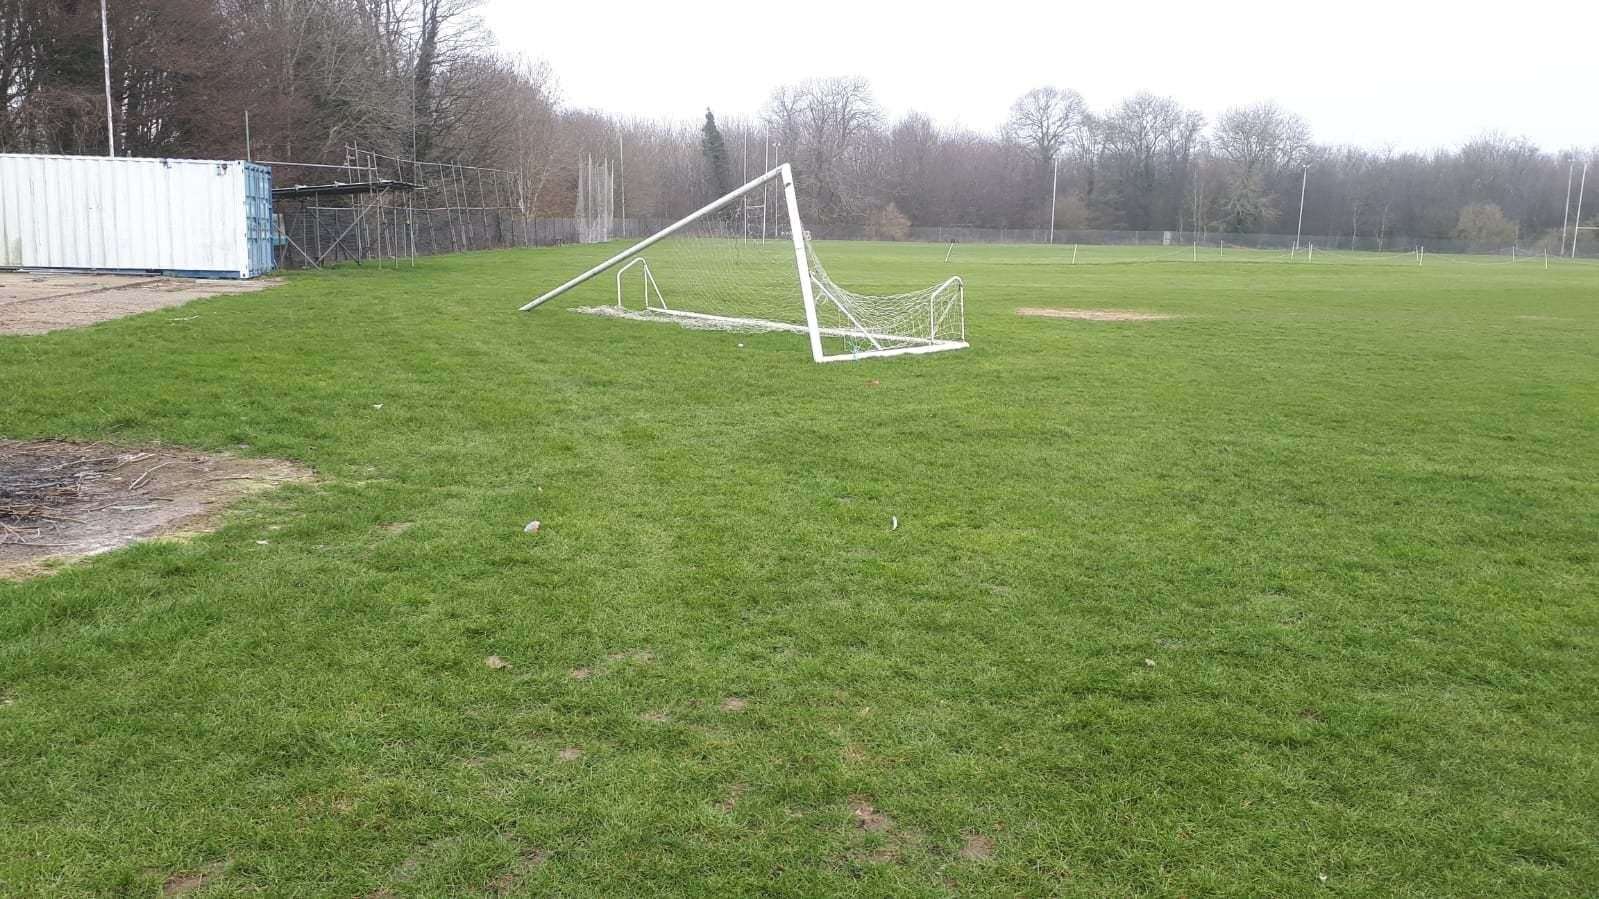 Damage at Lordswood Football Club. Picture: @LordswoodFC